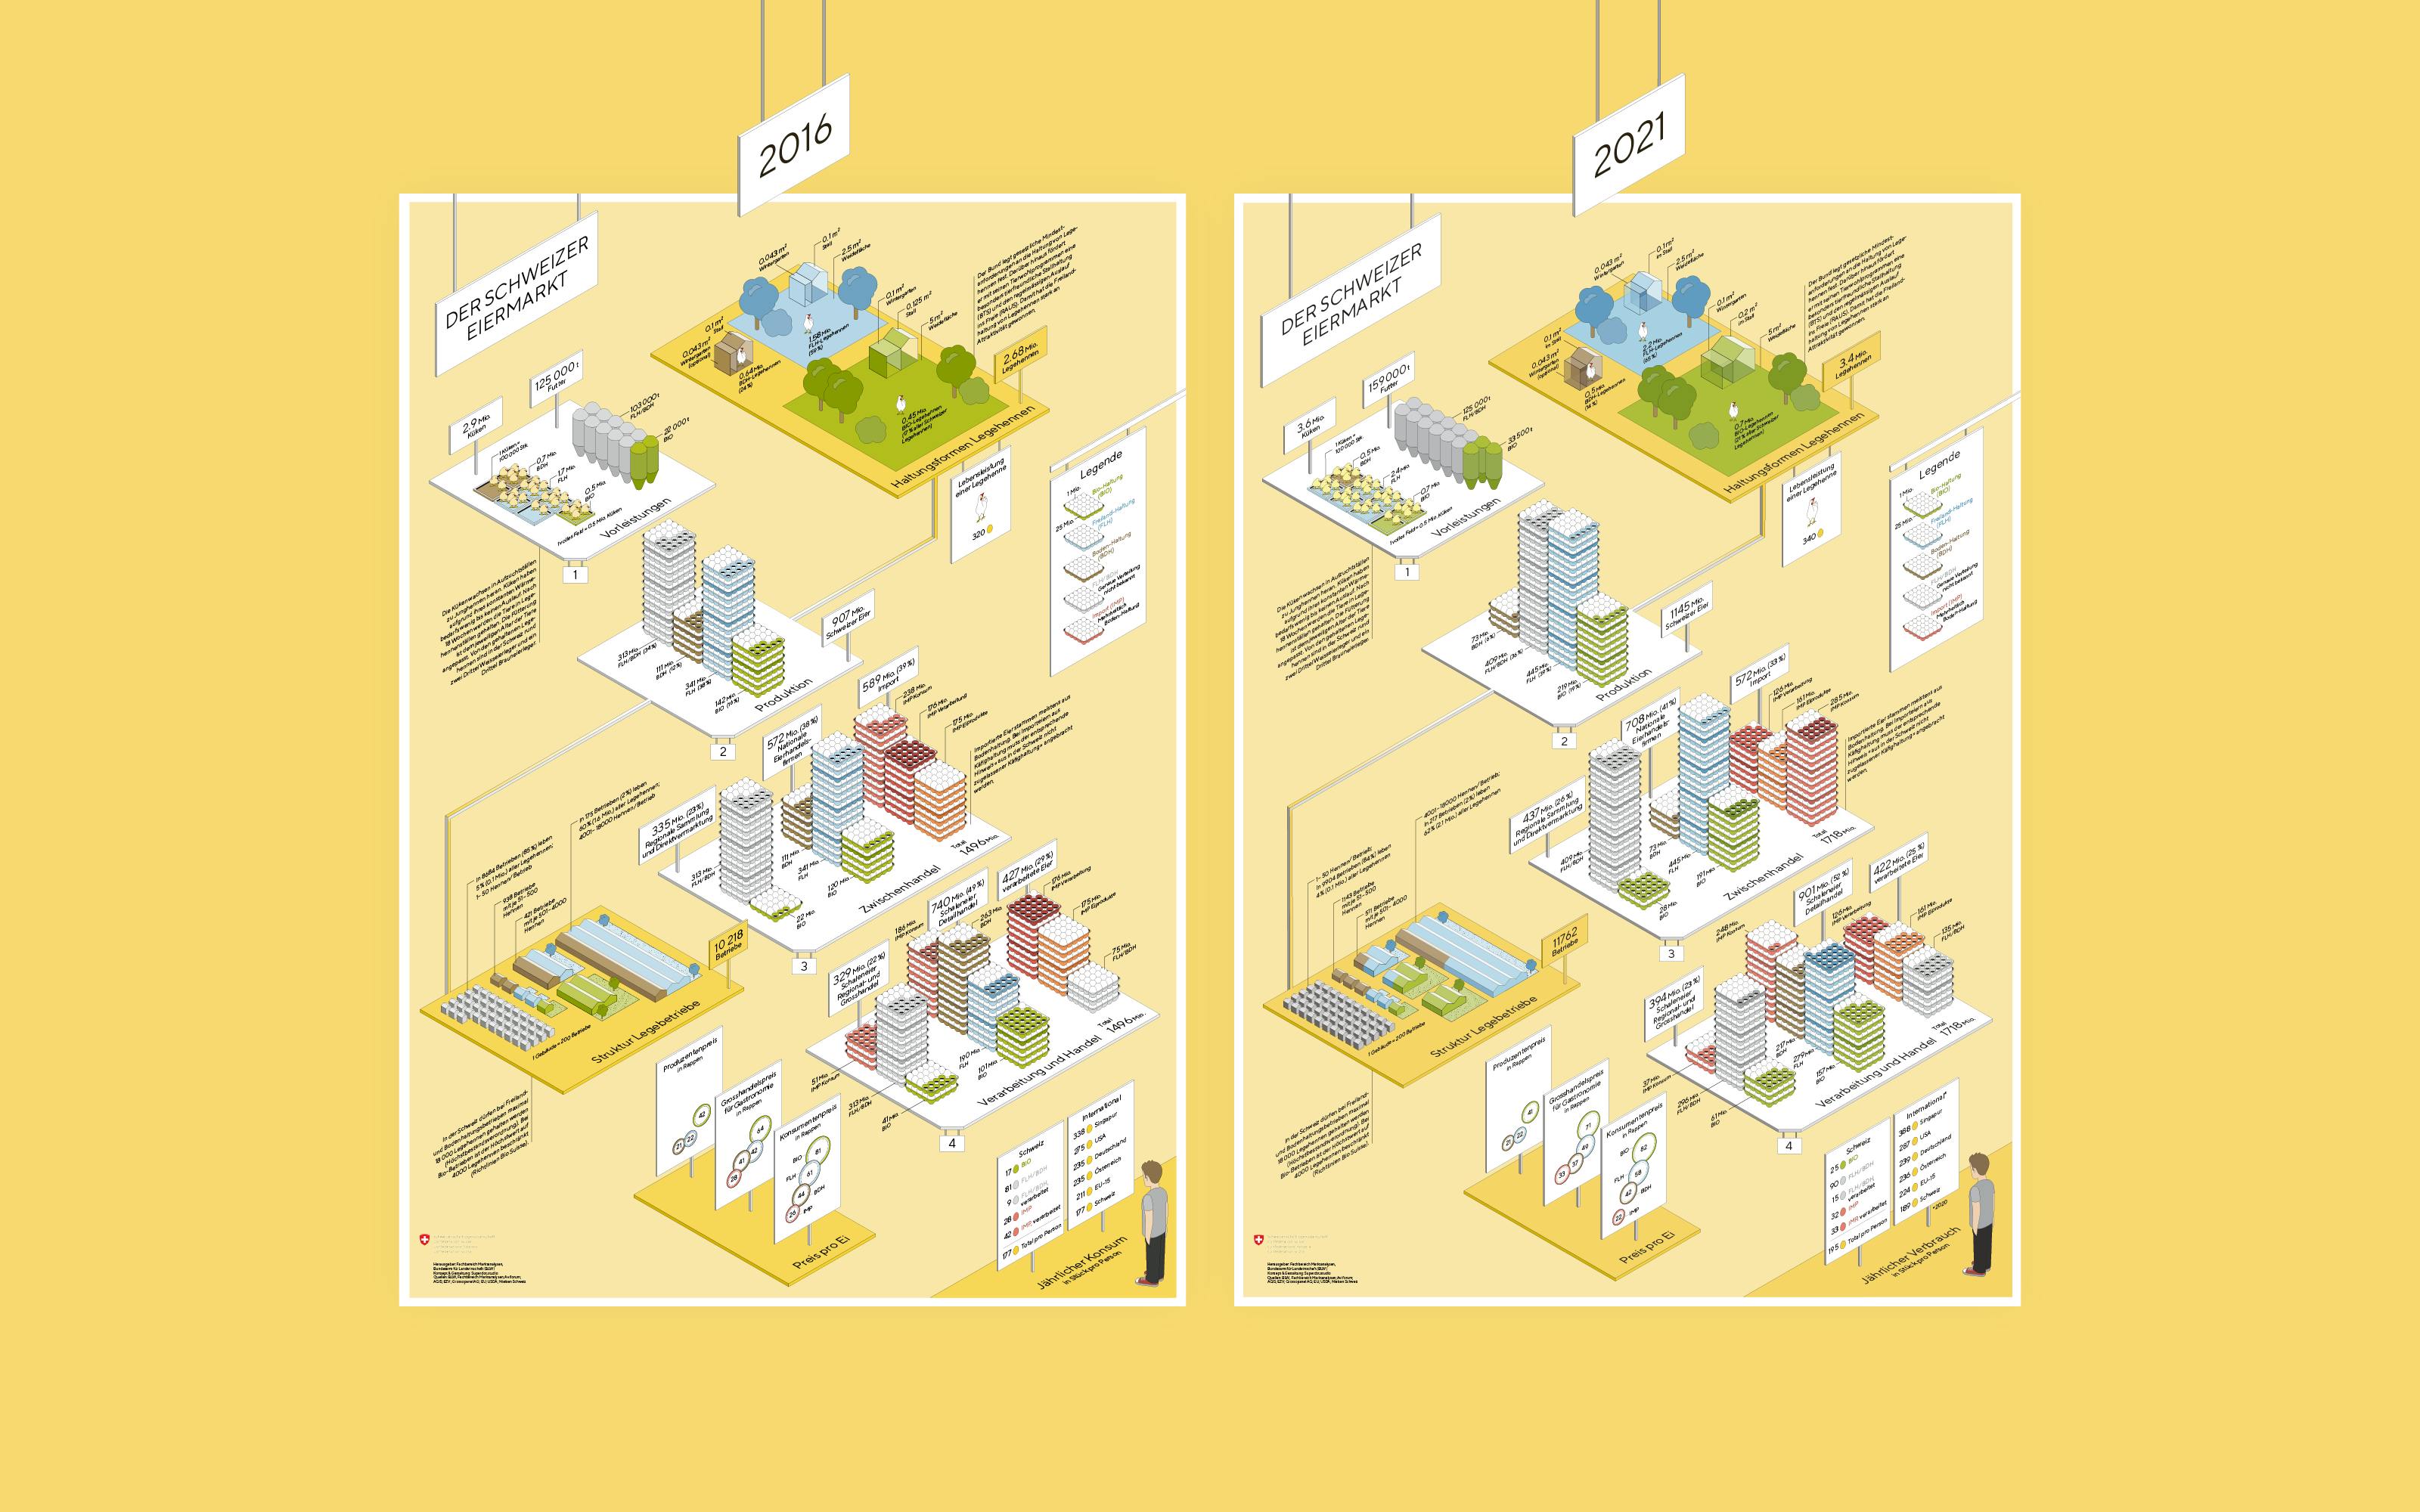 The Swiss Federal Office for Agriculture commissioned us to create a playful, attractive and fact-based visualization of the value chain of the Swiss egg market. The challenge we set ourselves was to create a visual branded grammar that would work for years and would also be suitable for other topics in agriculture.